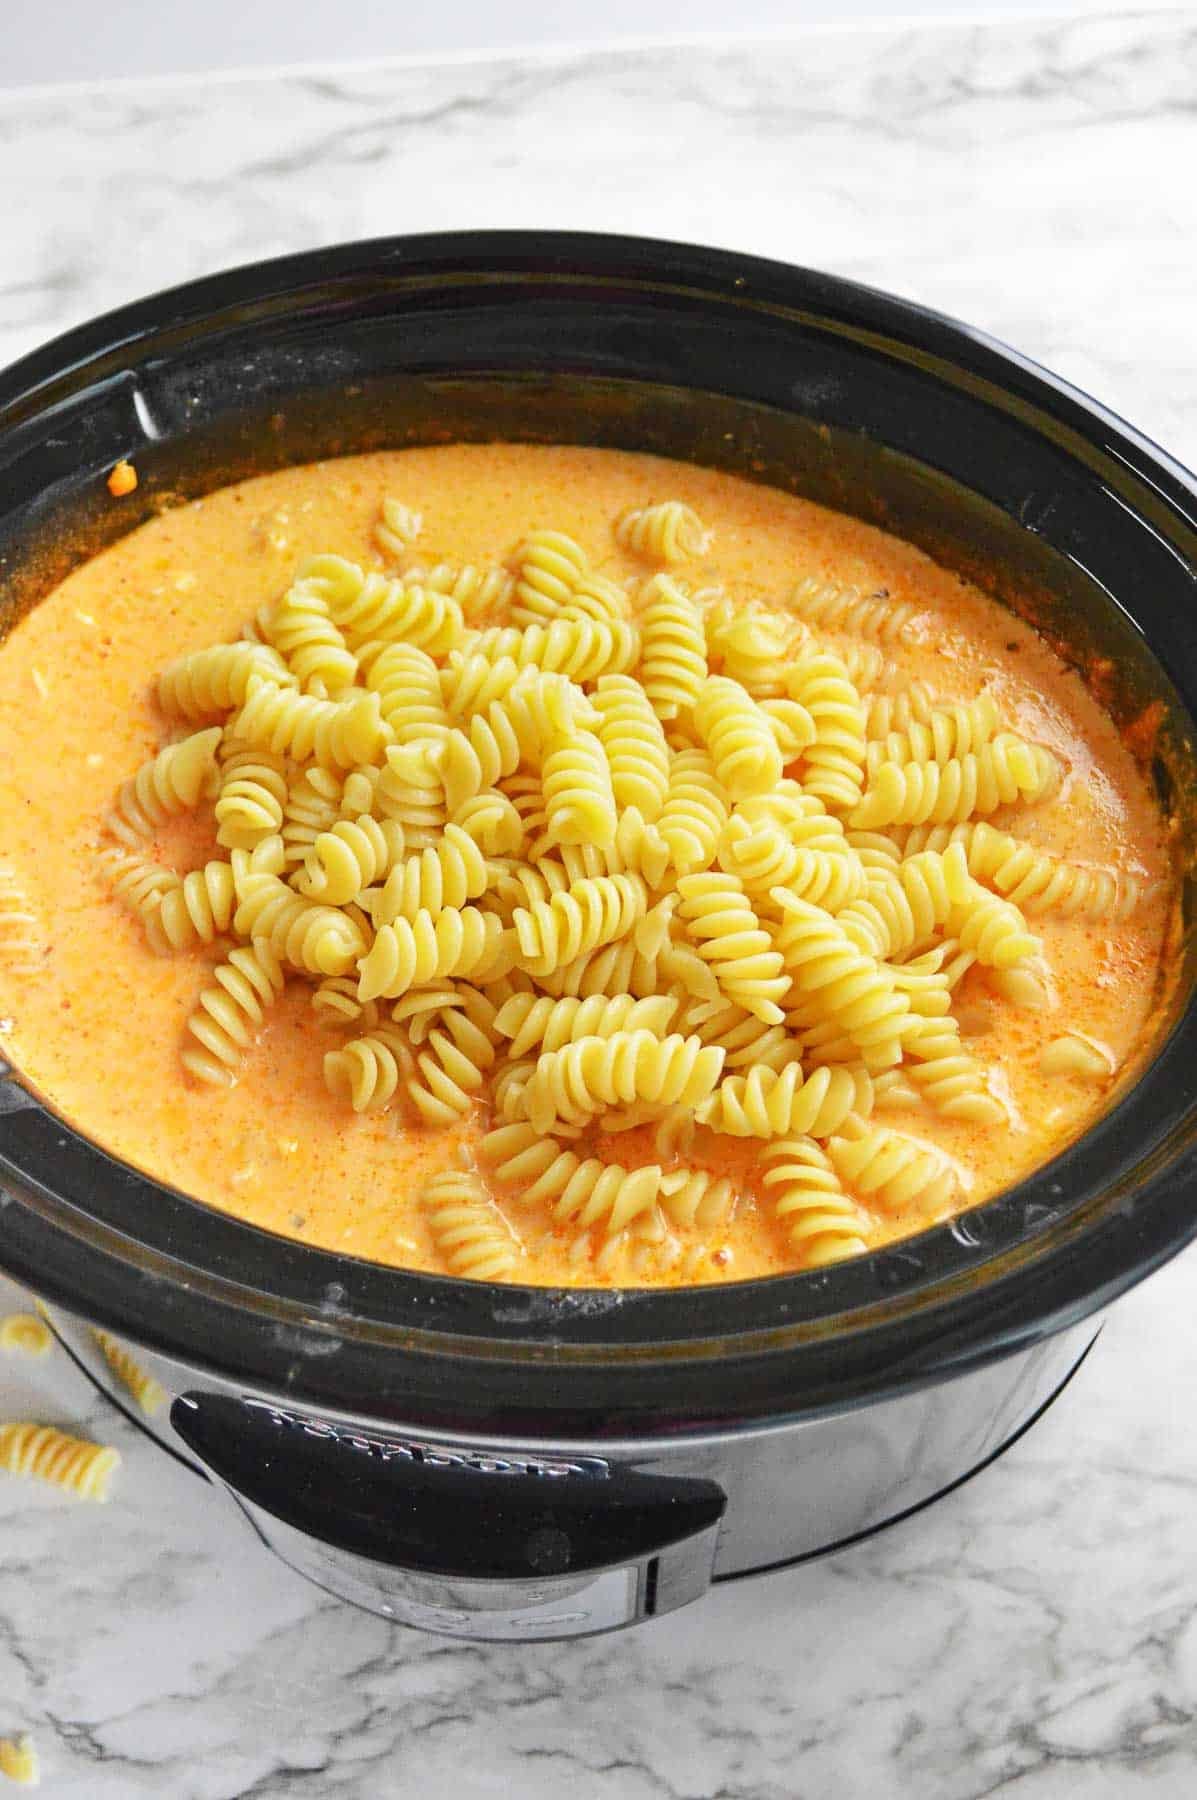 rotini noodles in a cheesy sauce in a crock pot.